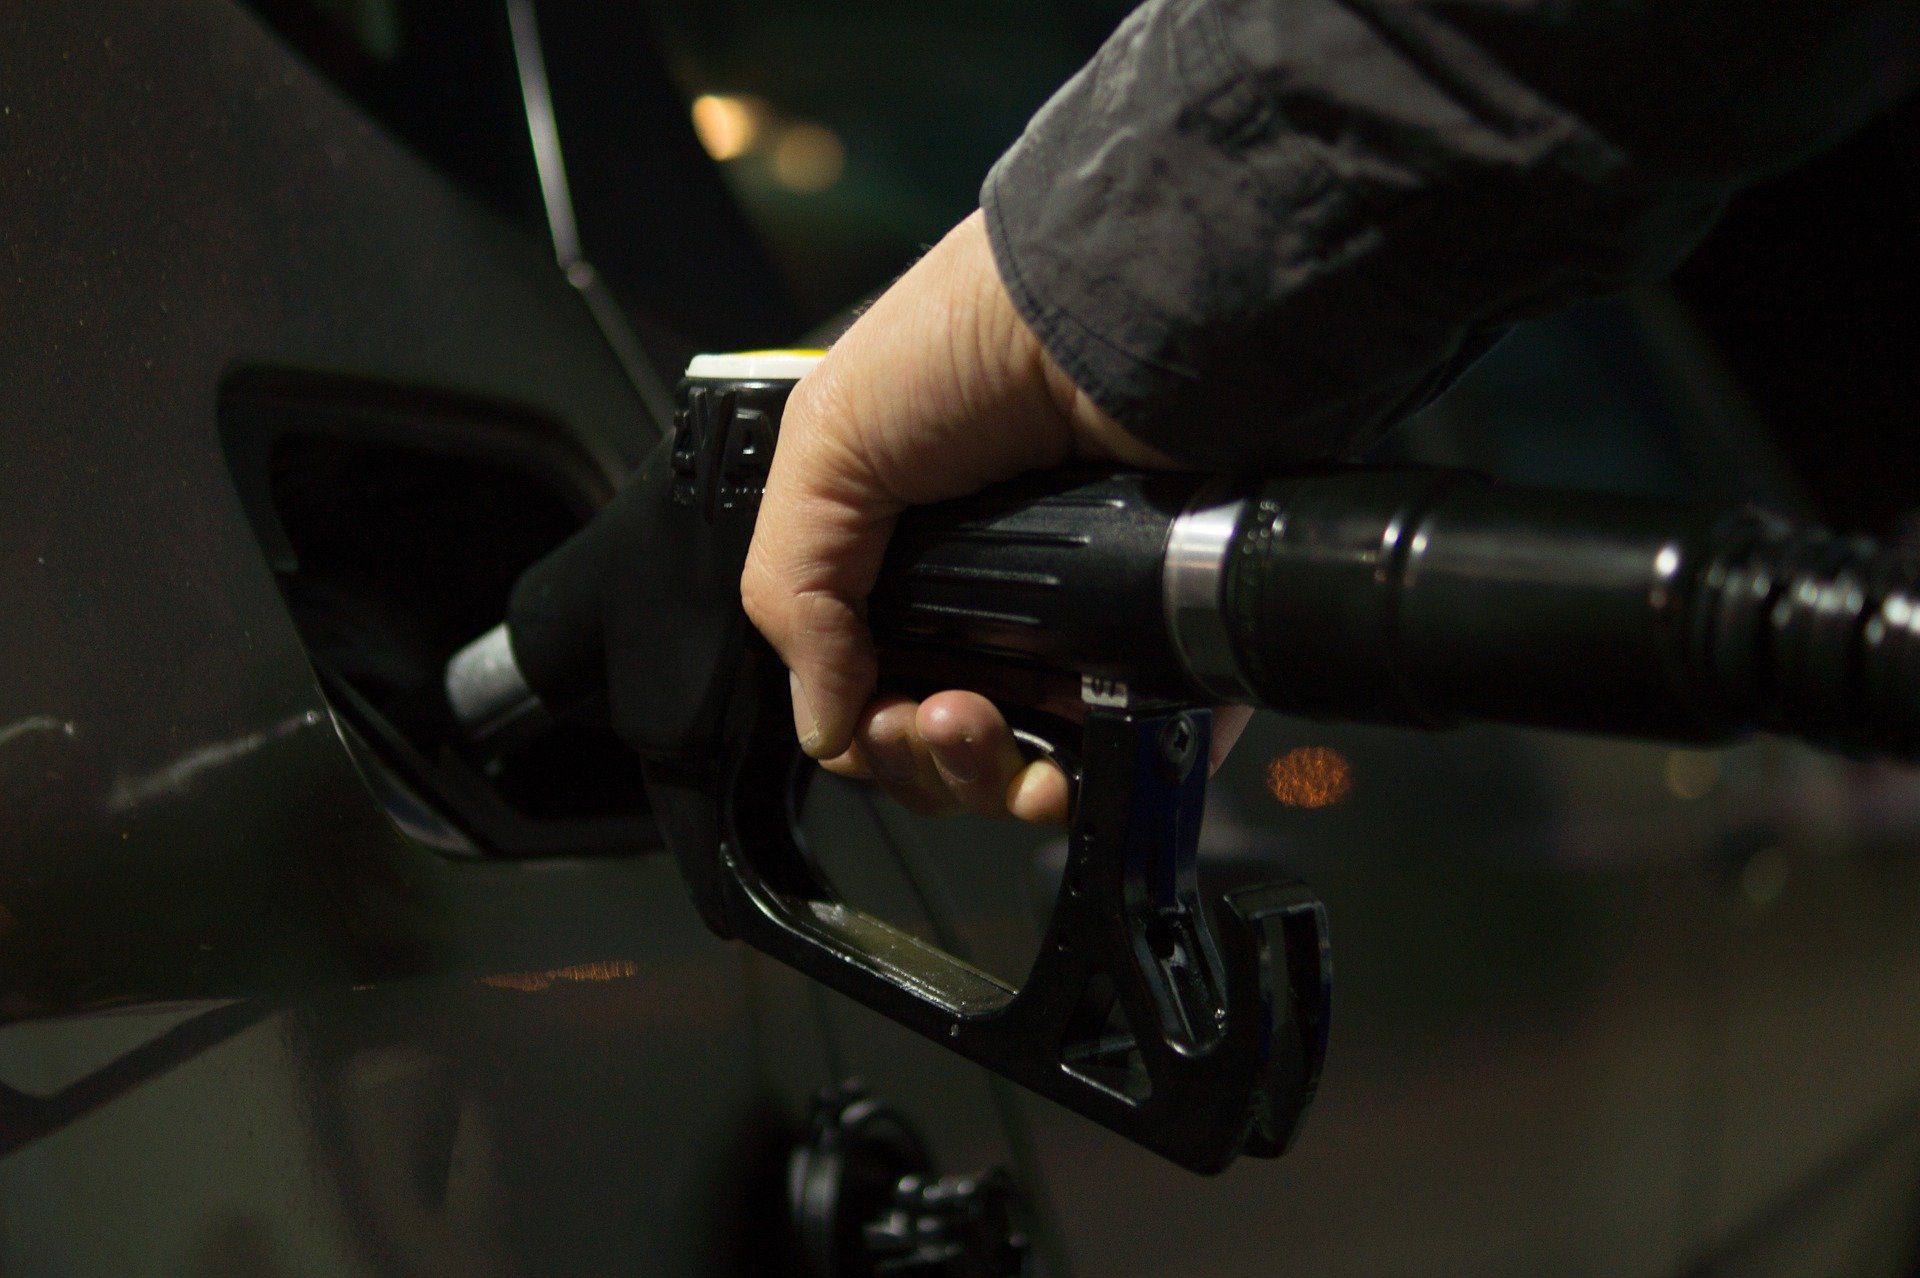 Fuel prices hike: Petrol and Diesel rates increased by 80 paise on March 30, 2022